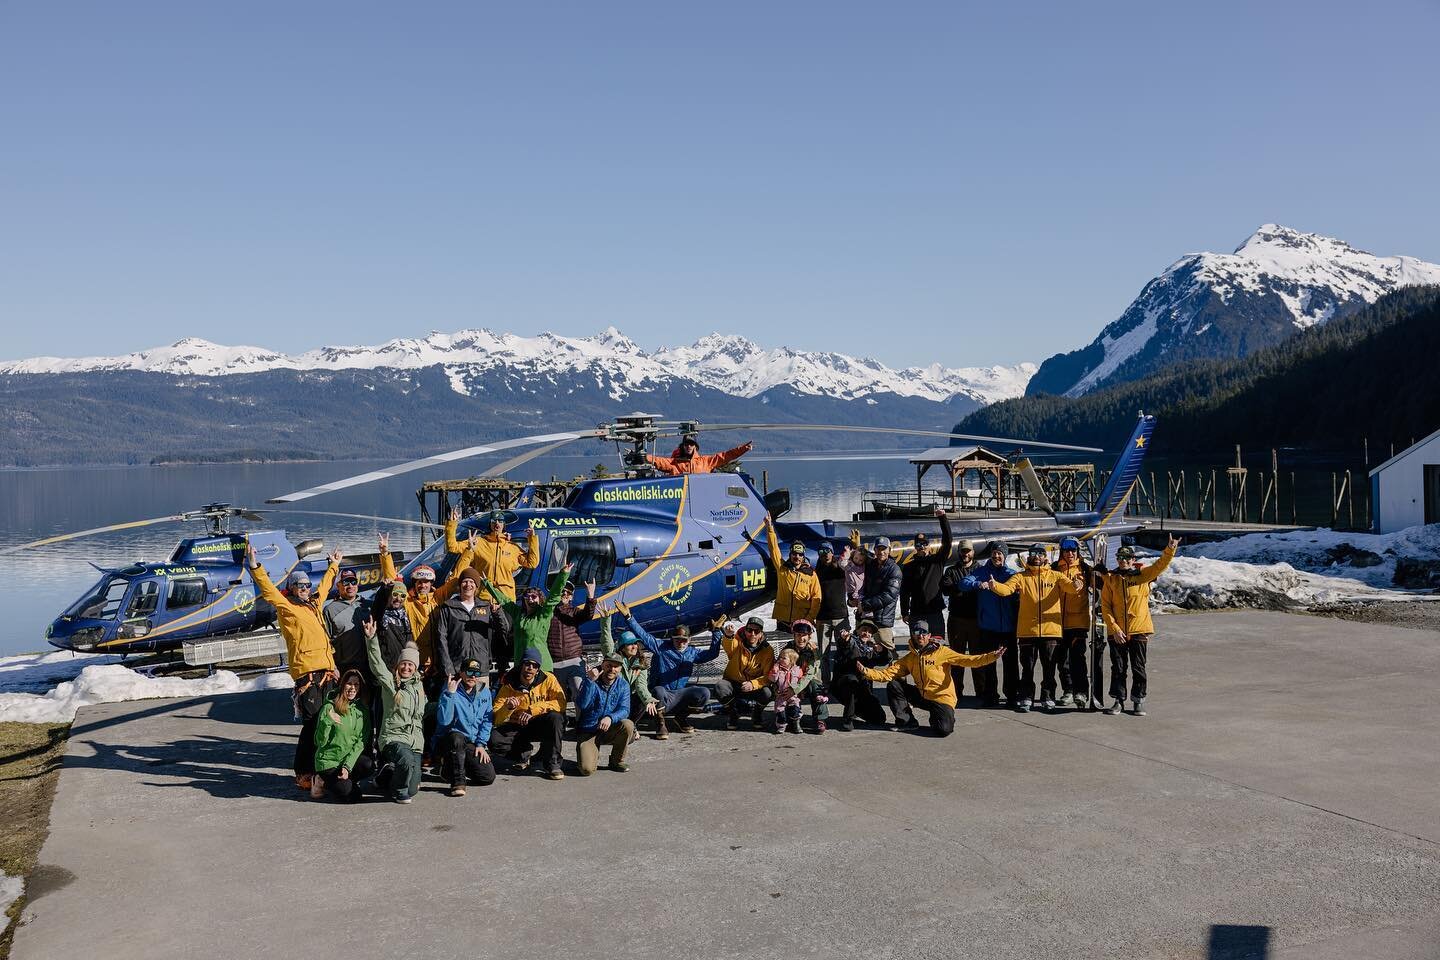 These are (most of) the people who made it all happen! Way to go team!!!! 25 years of crushing the Chugach in the bag!! Here&rsquo;s to the next 25 👊😎🚁
Thanks for the 📸 @michaeloverbeck 

And a huge thanks to all our sponsors! Couldn&rsquo;t have